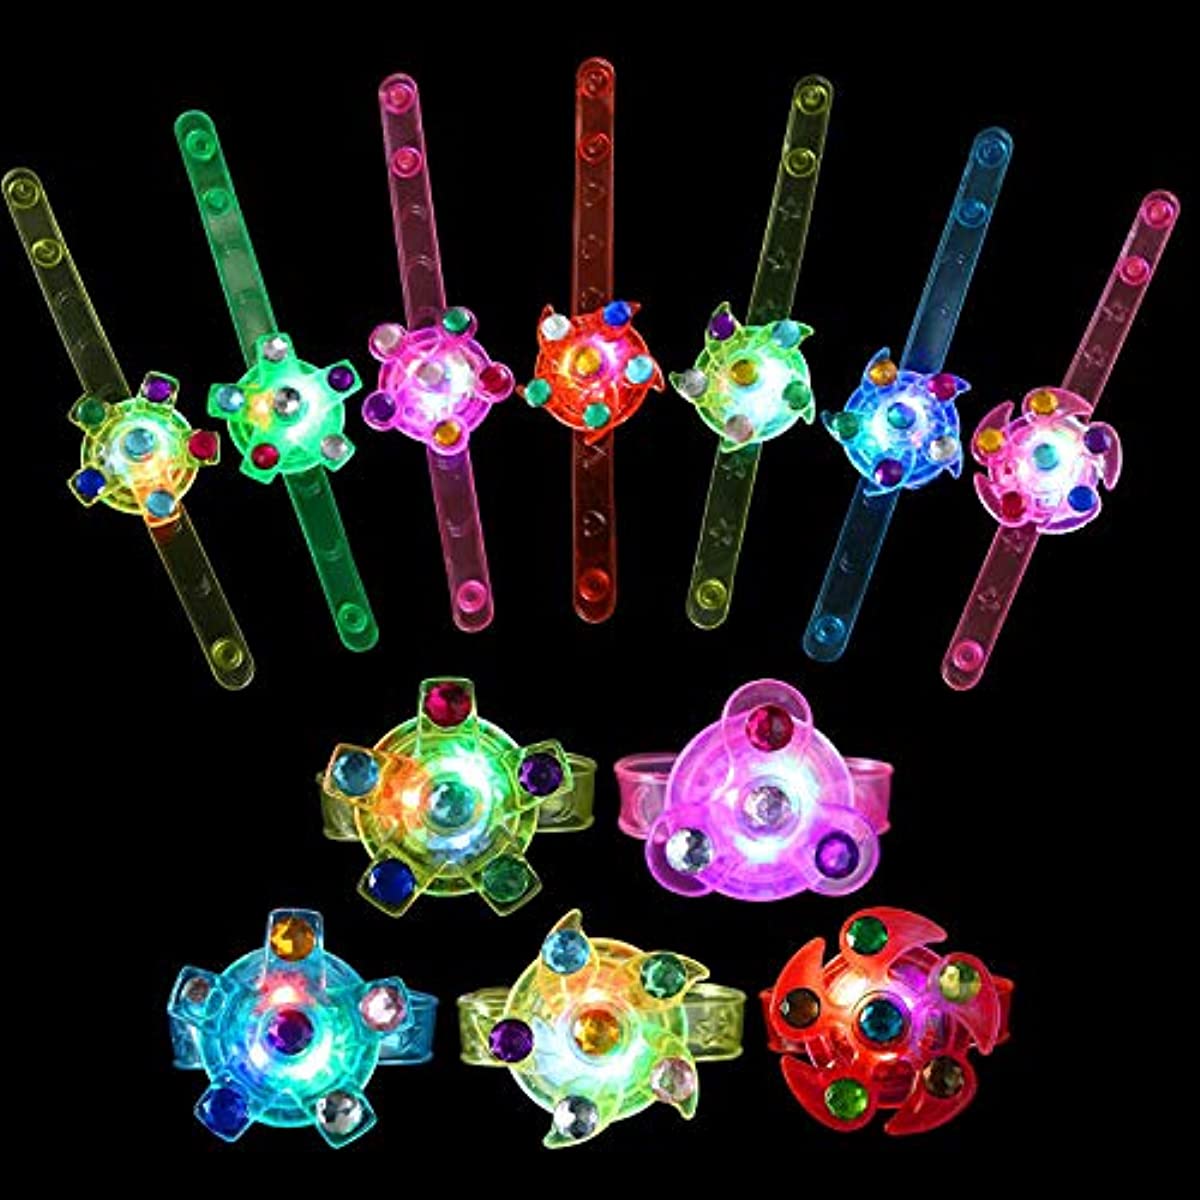 78Pcs LED Light Up Toy Party Favors Glow In The Dark Supplies Bulk